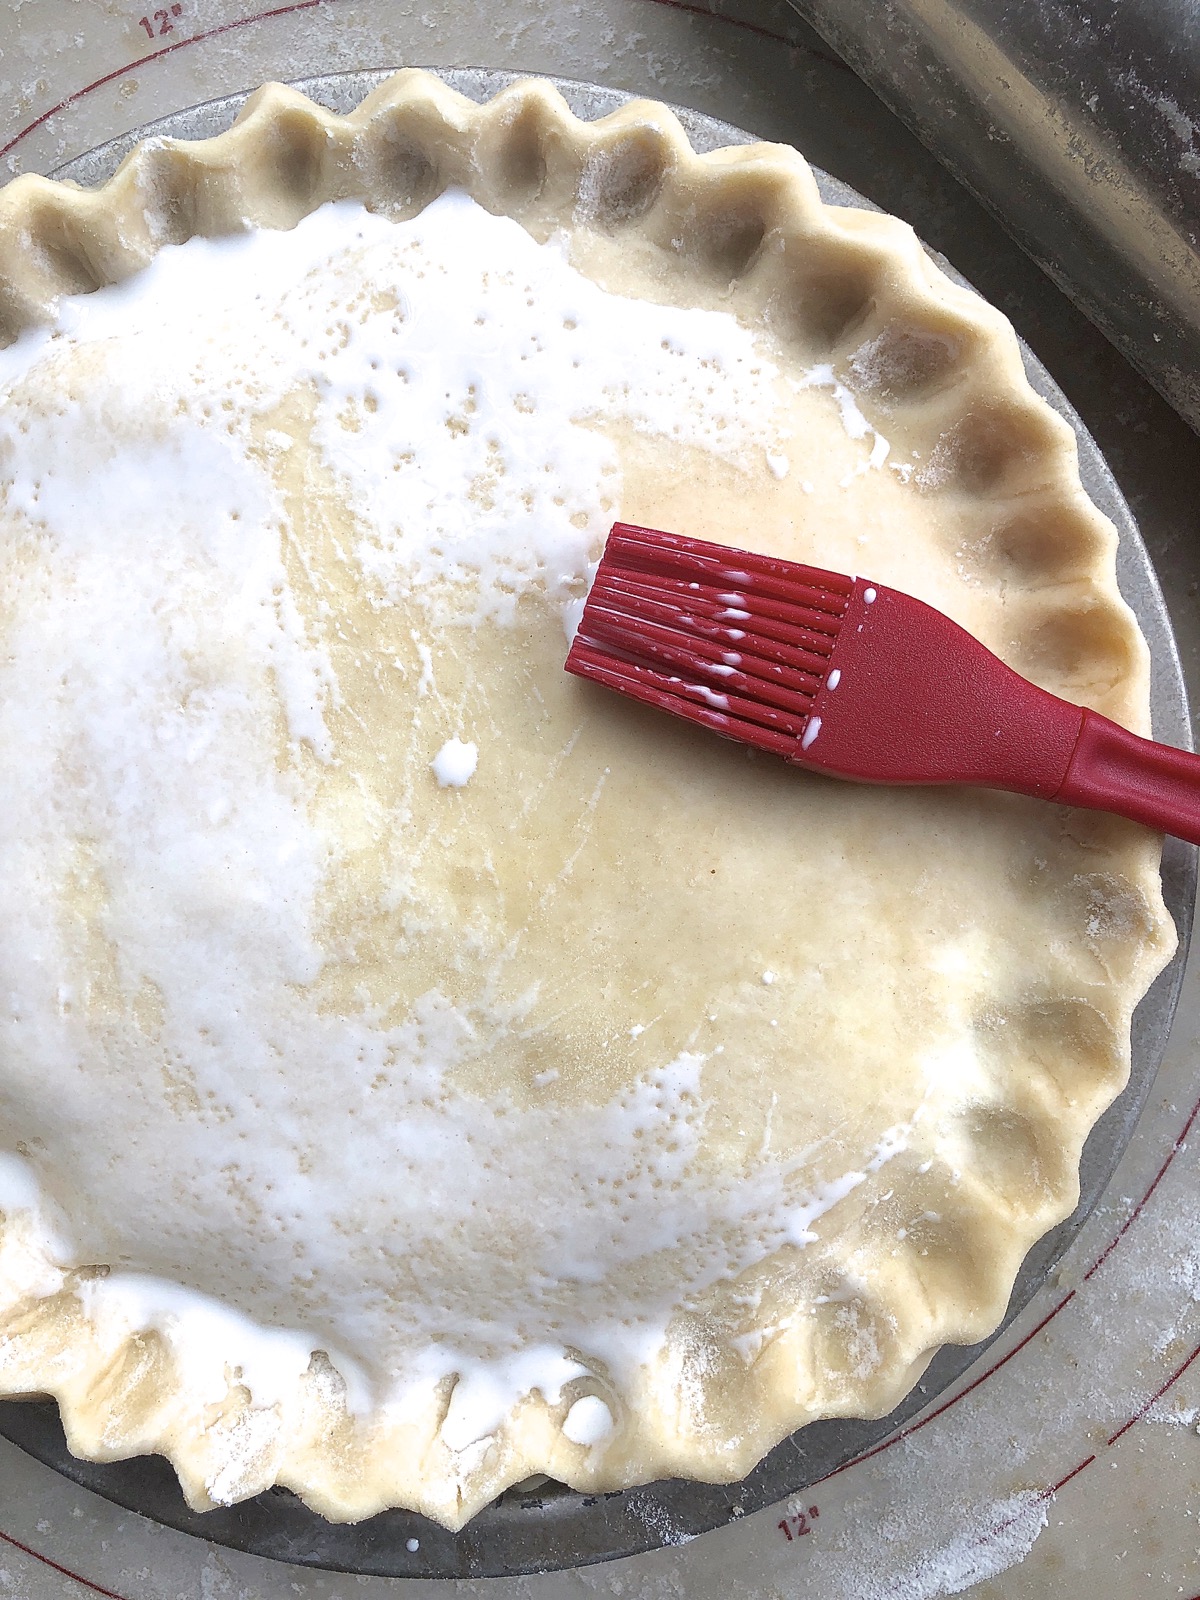 Unbaked pie brushed with milk to help browning in the oven